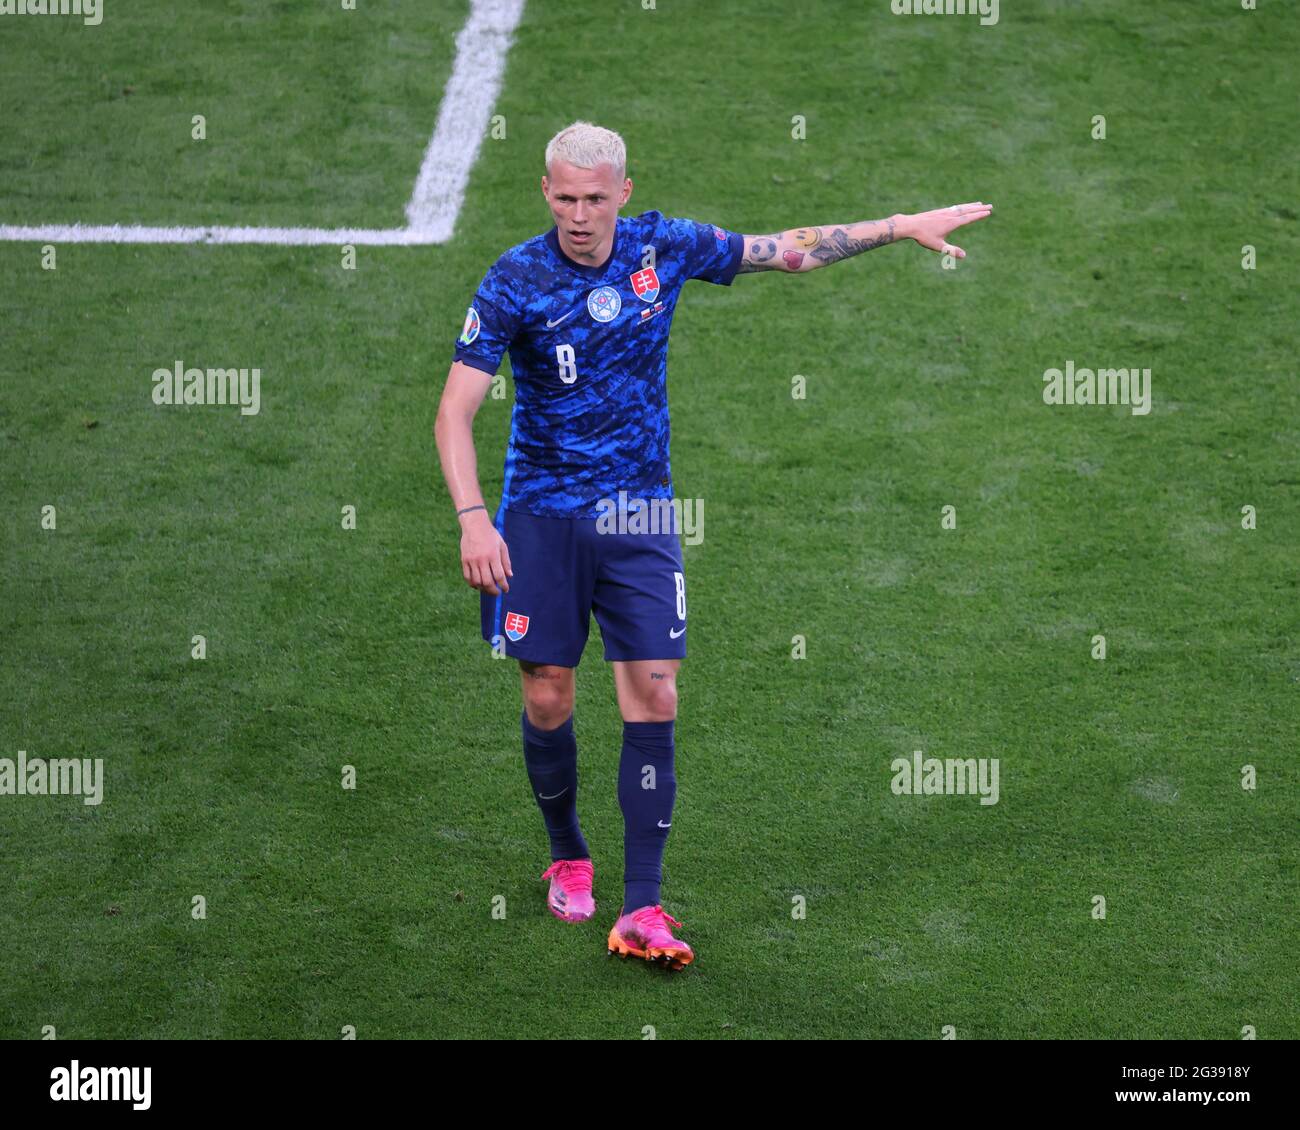 Saint Petersburg, Russia. 14th June, 2021. Ondrej Duda (8) of Slovakia seen during the European championship EURO 2020 between Poland and Slovakia at Gazprom Arena.(Final Score; Poland 1:2 Slovakia). Credit: SOPA Images Limited/Alamy Live News Stock Photo